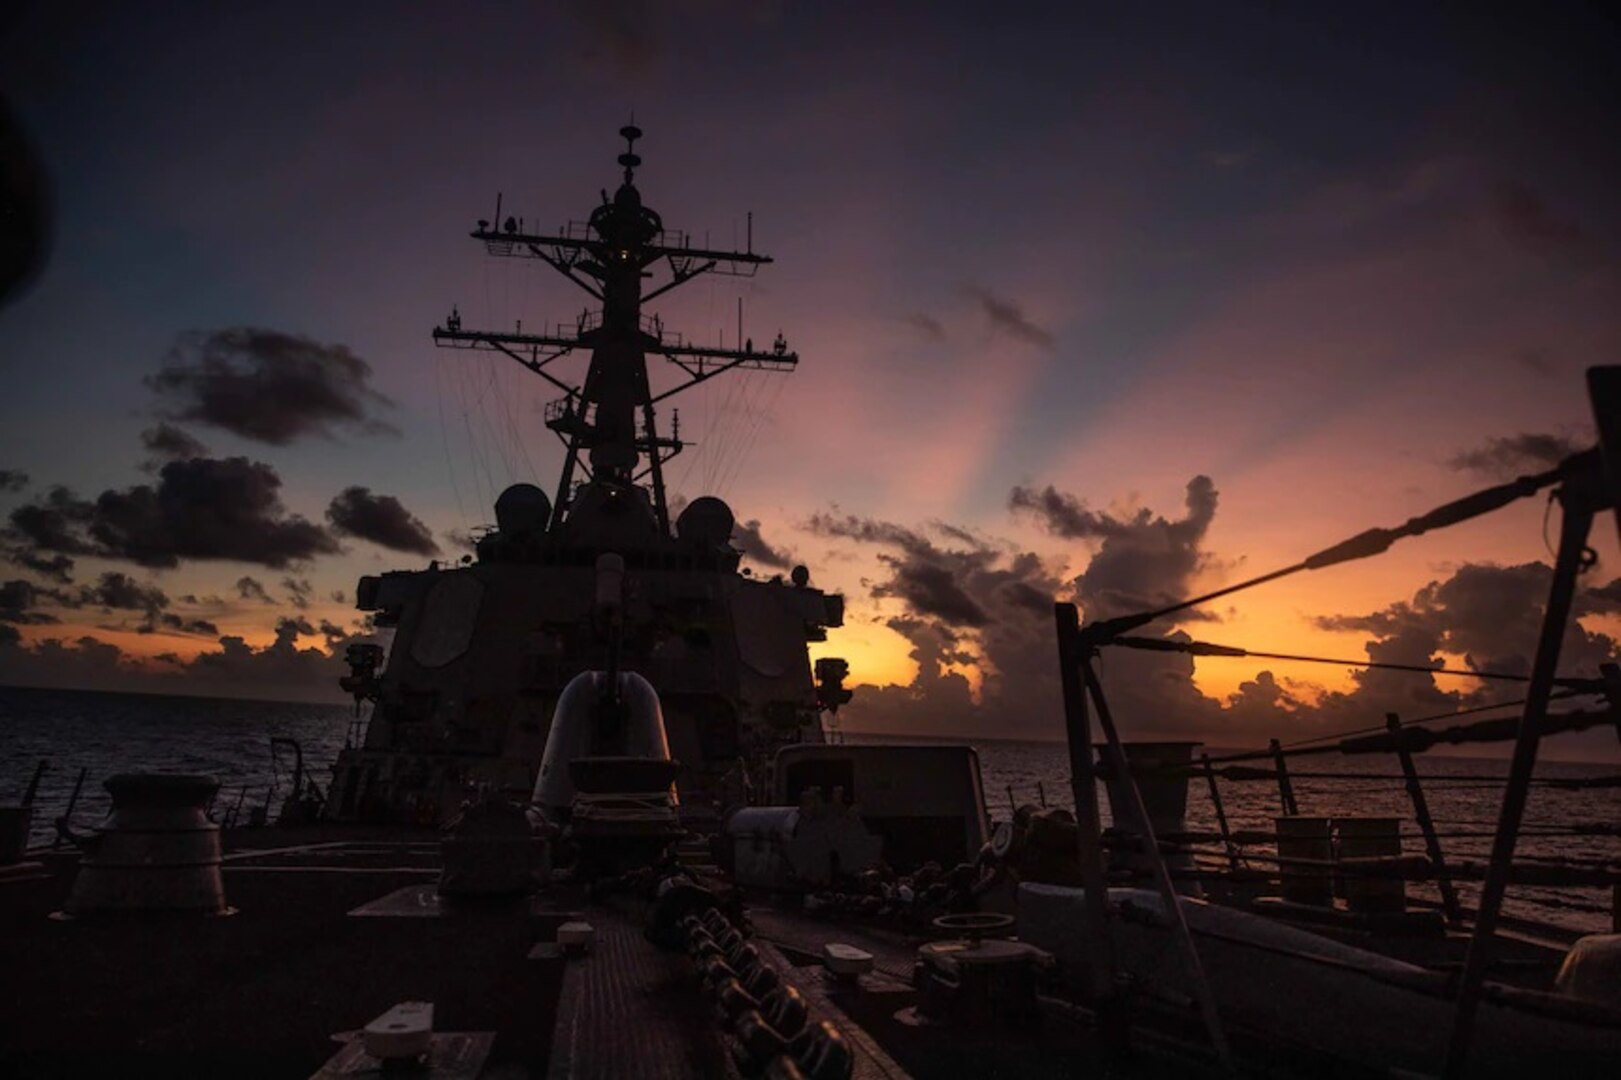 SOUTH CHINA SEA (May 20, 2021) The Arleigh Burke-class guided-missile destroyer USS Curtis Wilbur (DDG 54) conducts routine operations in the South China Sea. Curtis Wilbur is assigned to Commander, Task Force 71/Destroyer Squadron (DESRON) 15, the Navy’s largest forward DESRON and the U.S. 7th Fleet’s principal surface force.